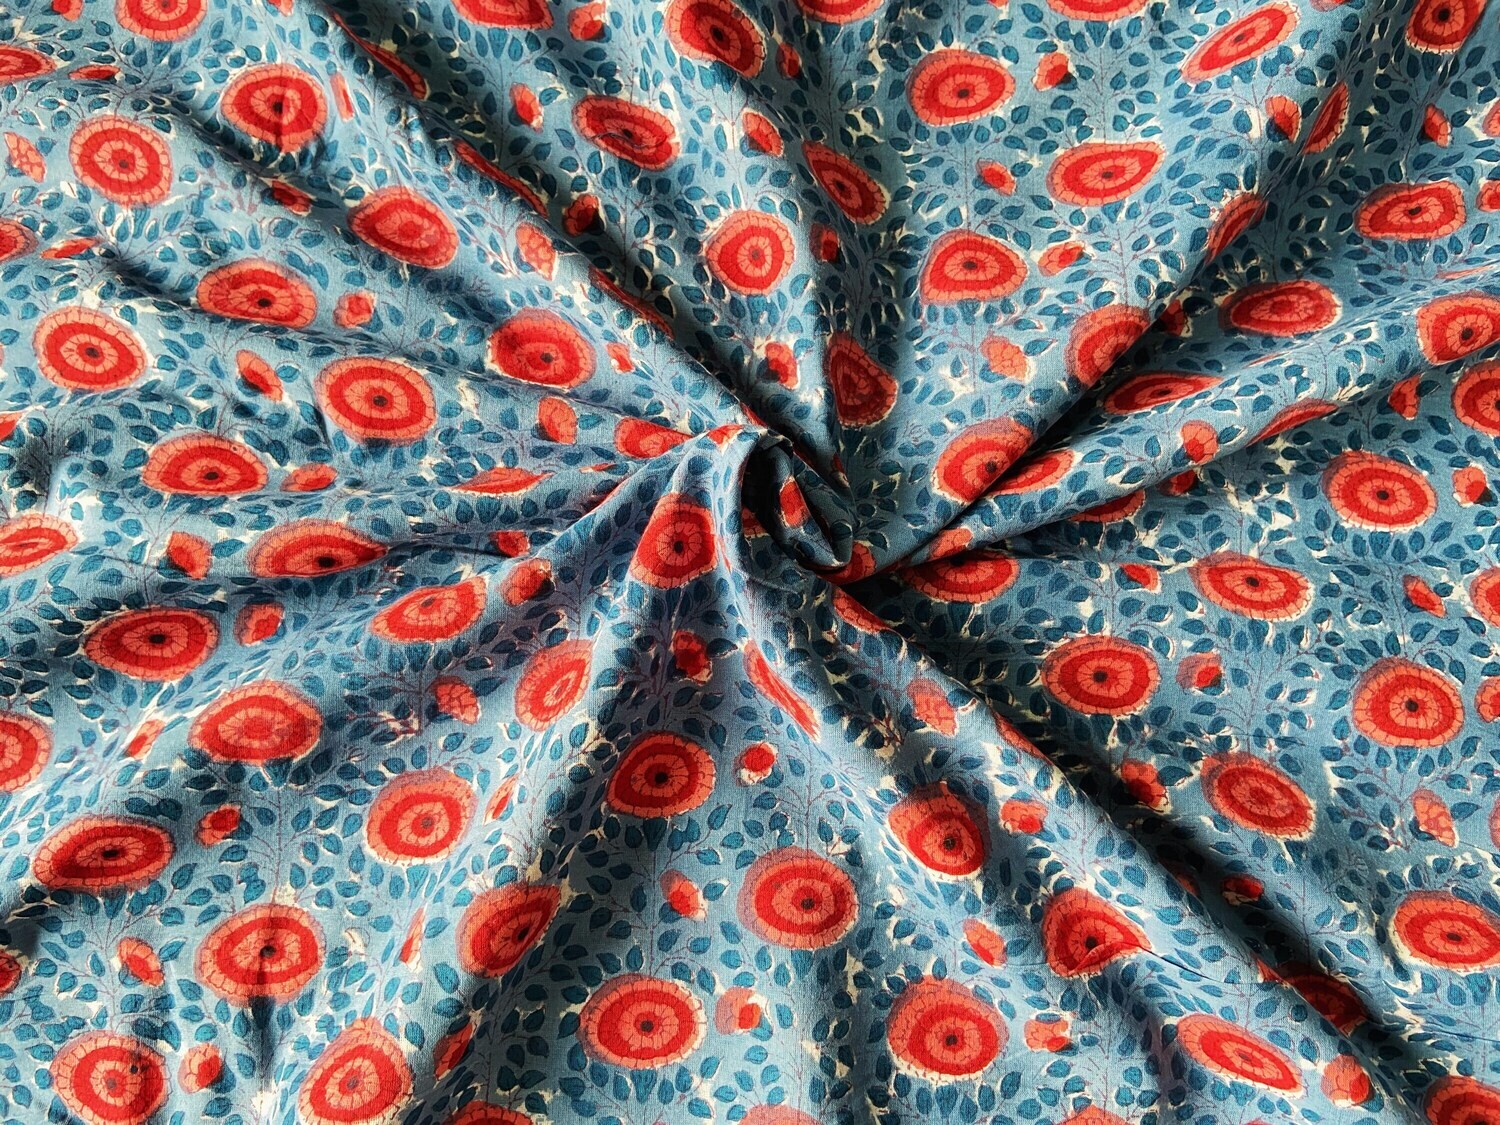 Red Indigo Floral Hand Block Print Indian Cotton Fabric for Dress Making, Sewing Quilting Crafting Fabric, 44 Inch Wide, Sold by Half Yard